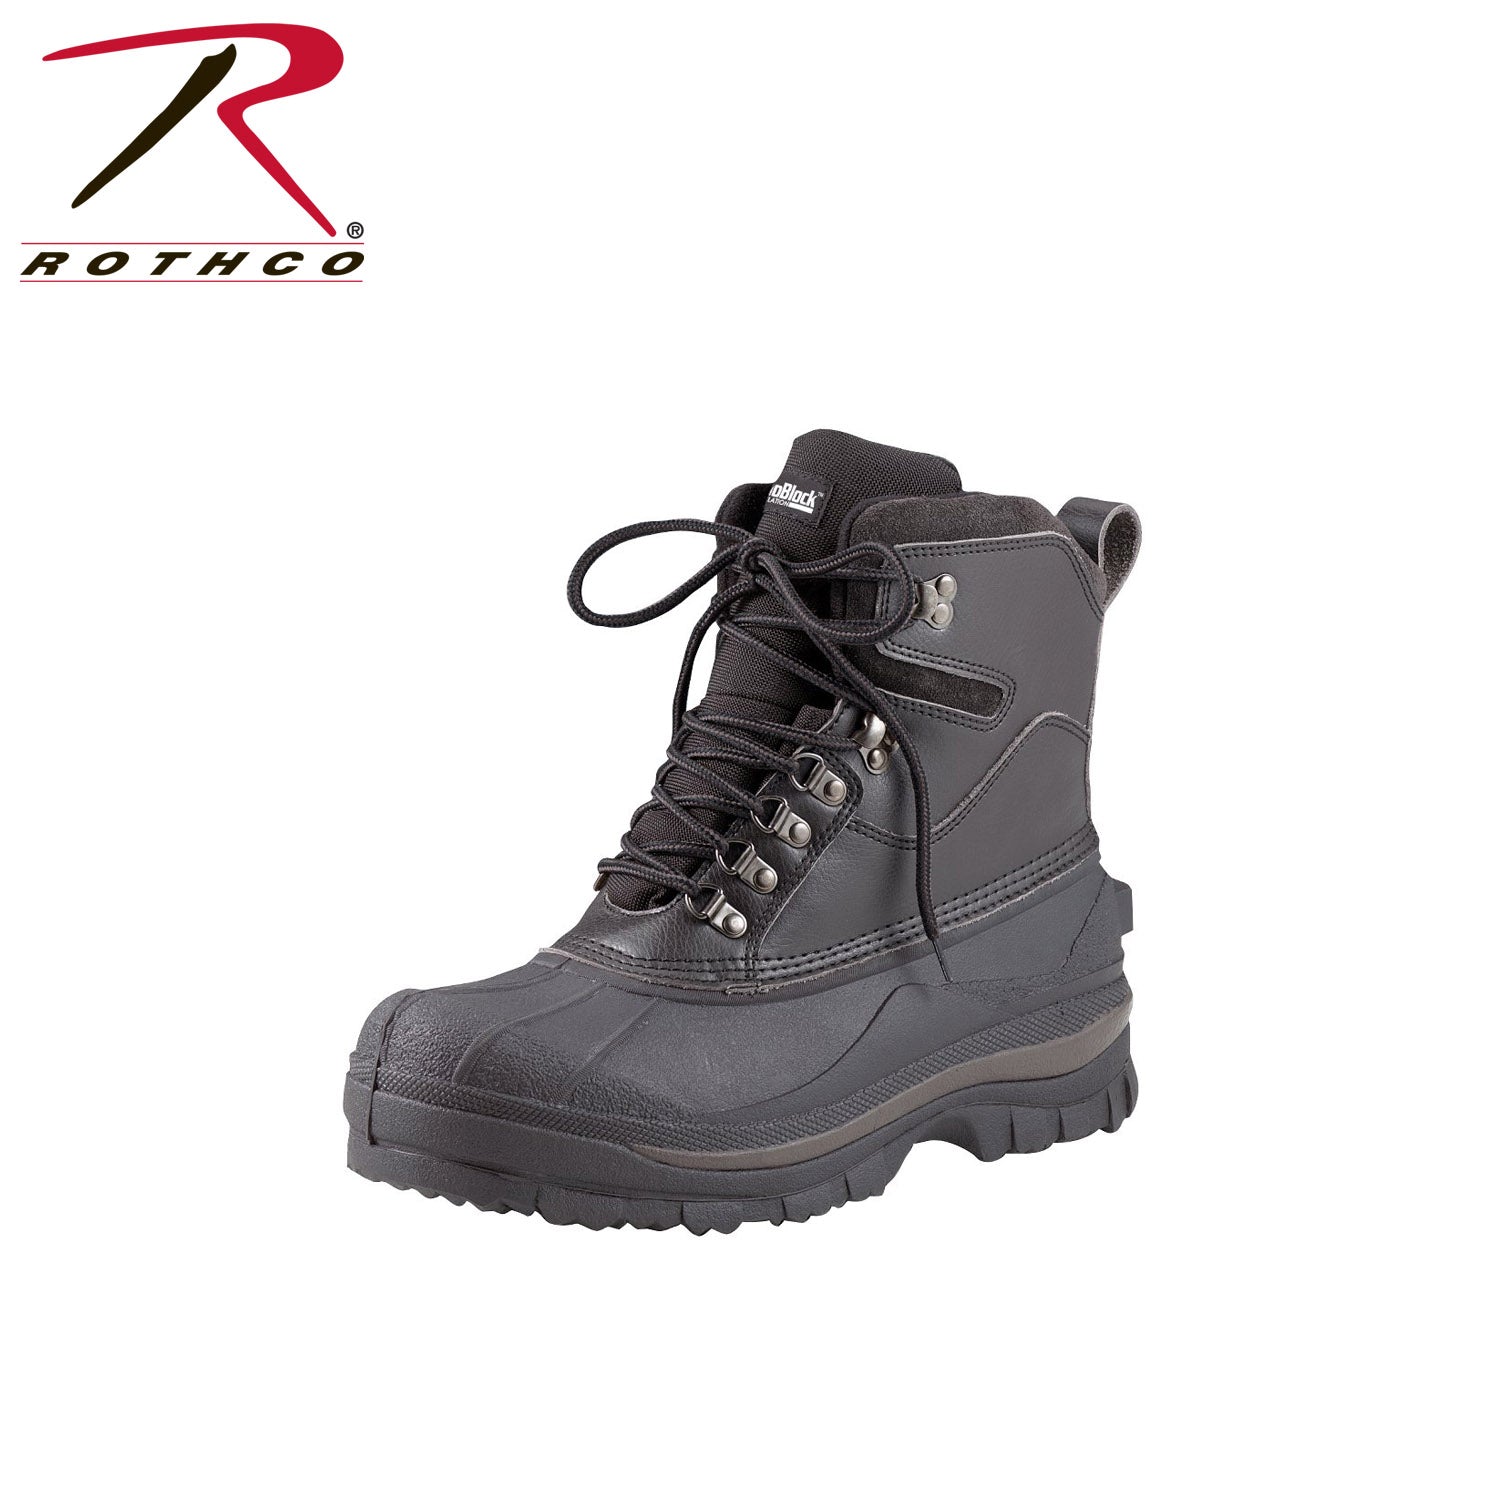 Rothco Cold Weather Hiking Boots - 8 Inch - Tactical Choice Plus